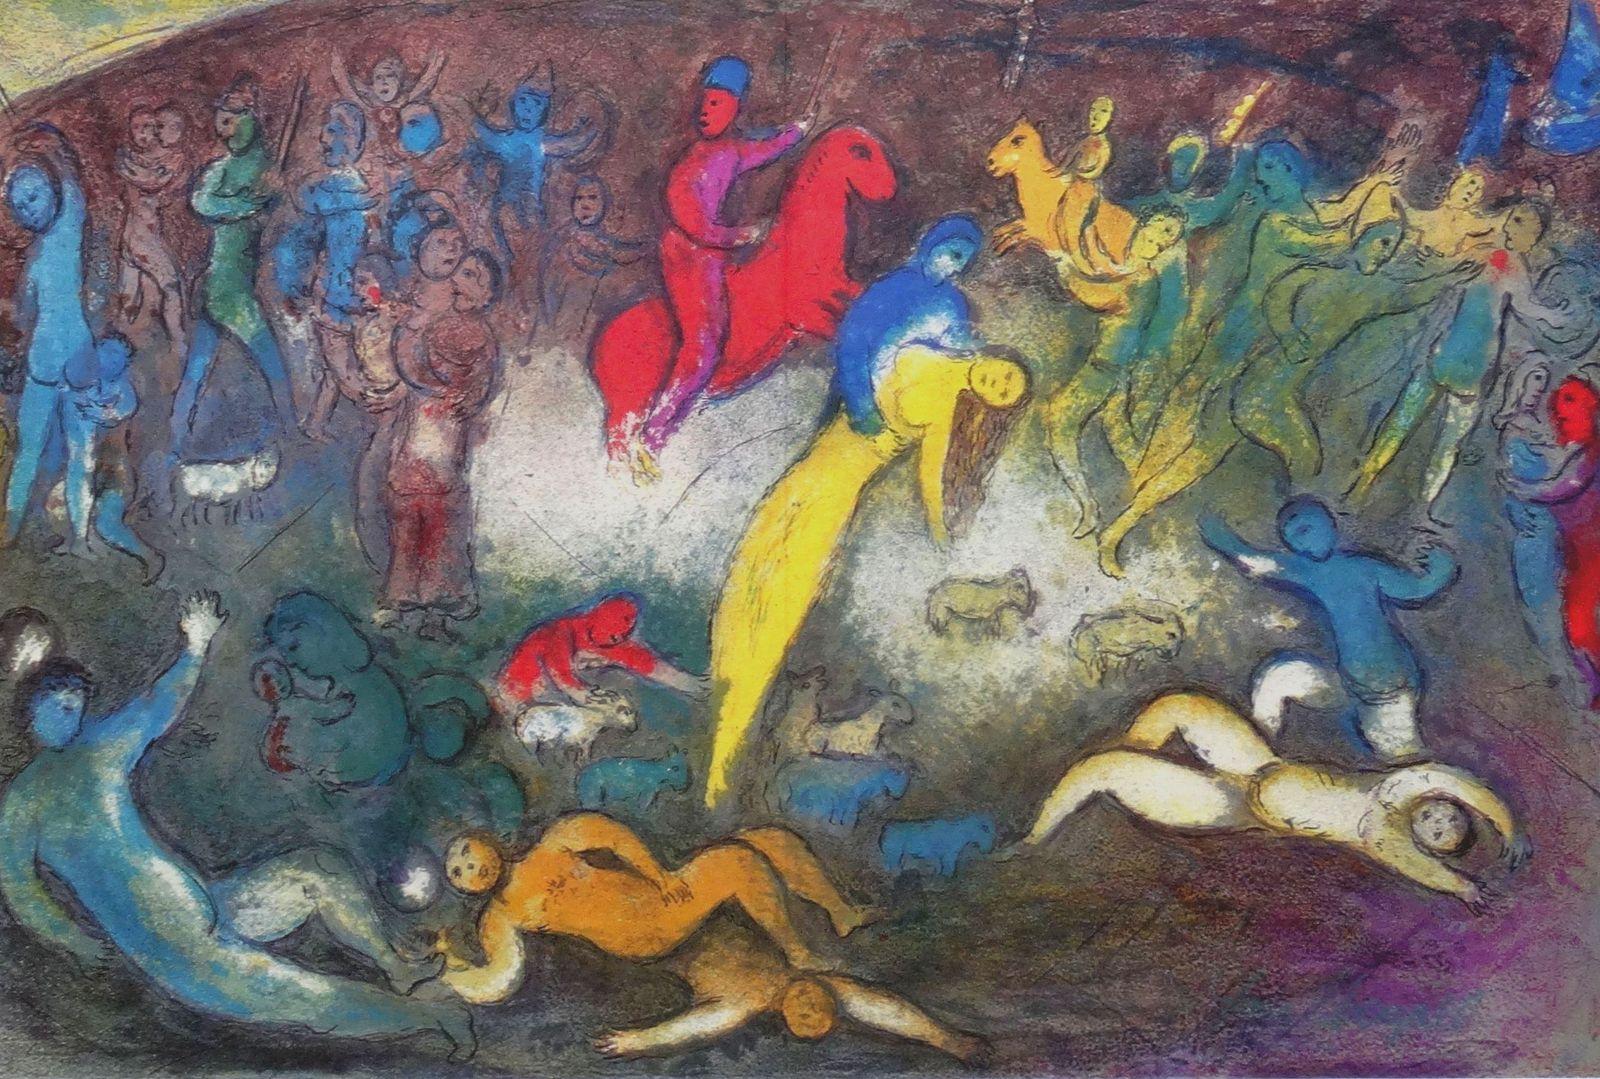 Daphnis and Chloe Suite. 1977, lithography, 48x33 cm